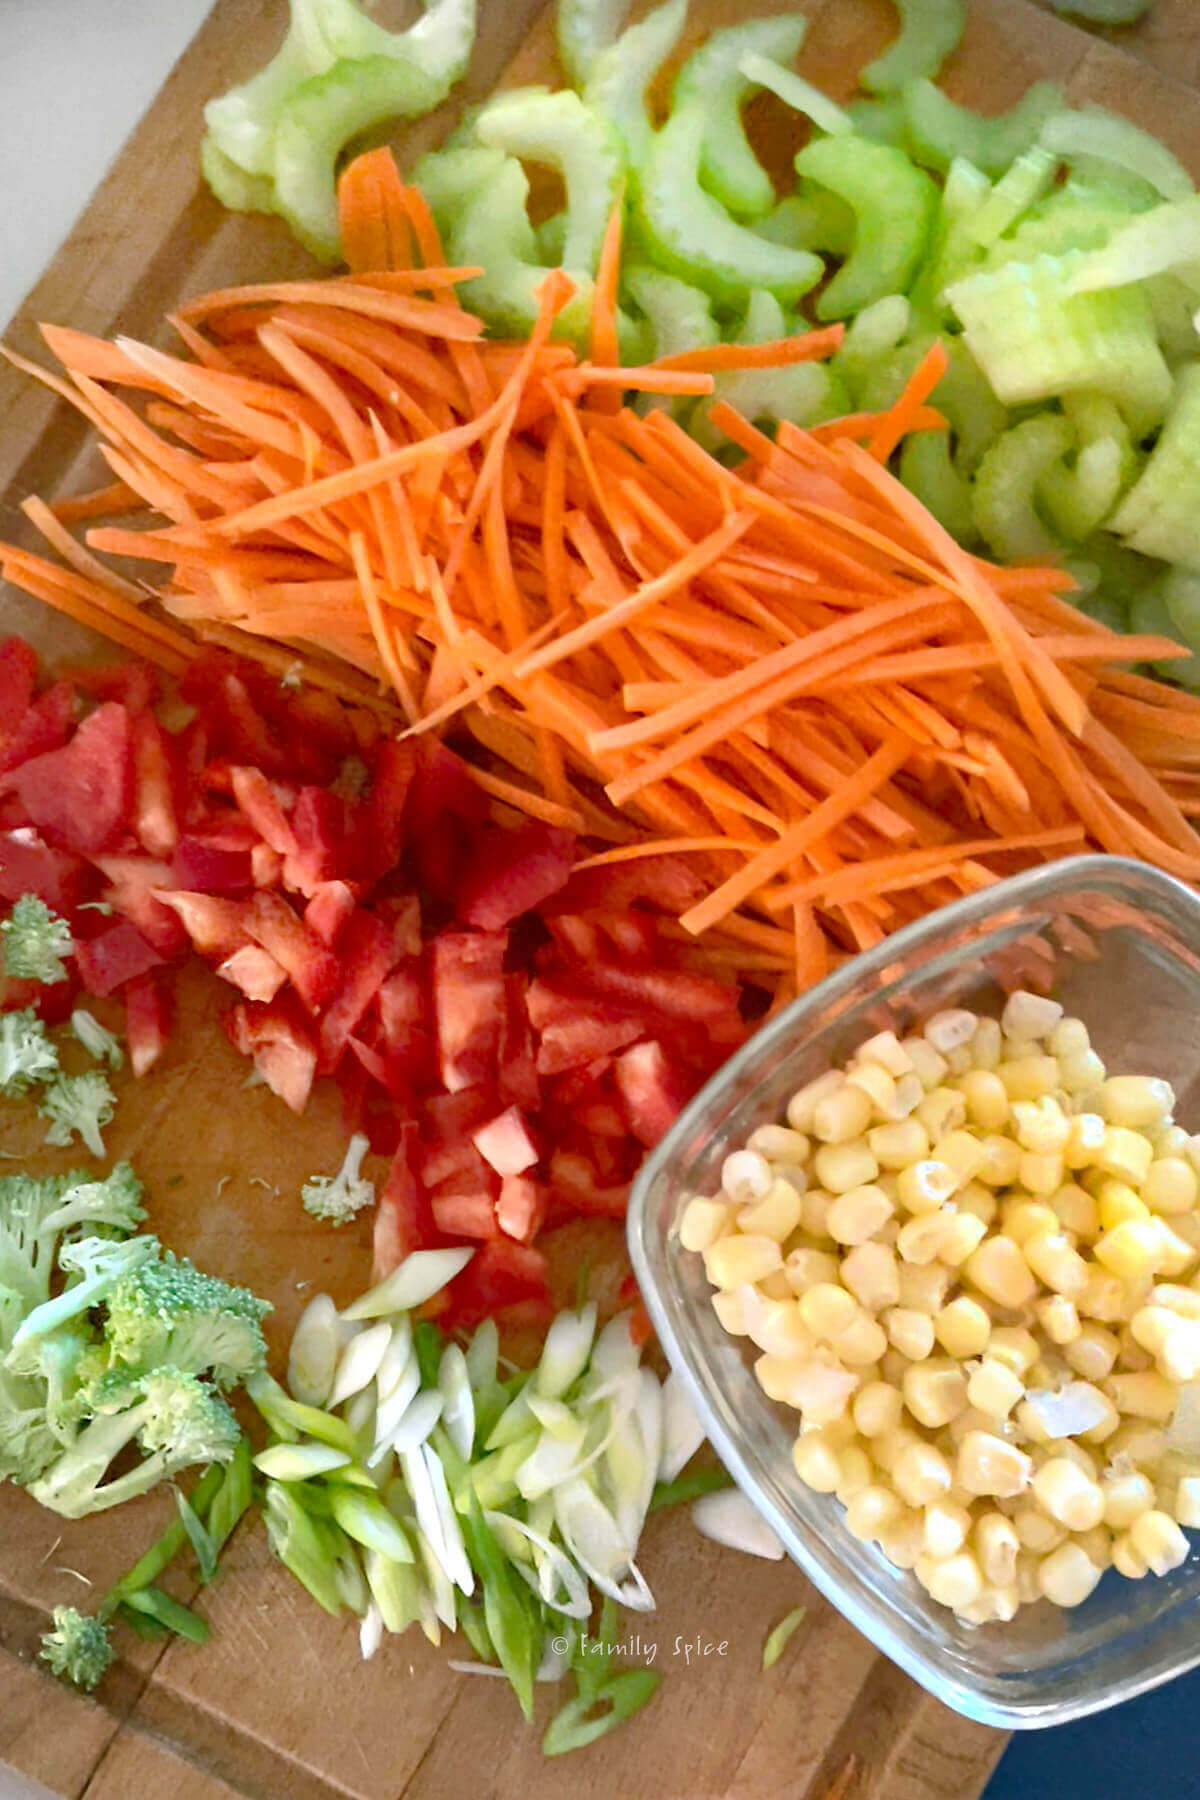 Chopped green onions, broccoli, red bell peppers, celery, carrots and corn on a chopping board